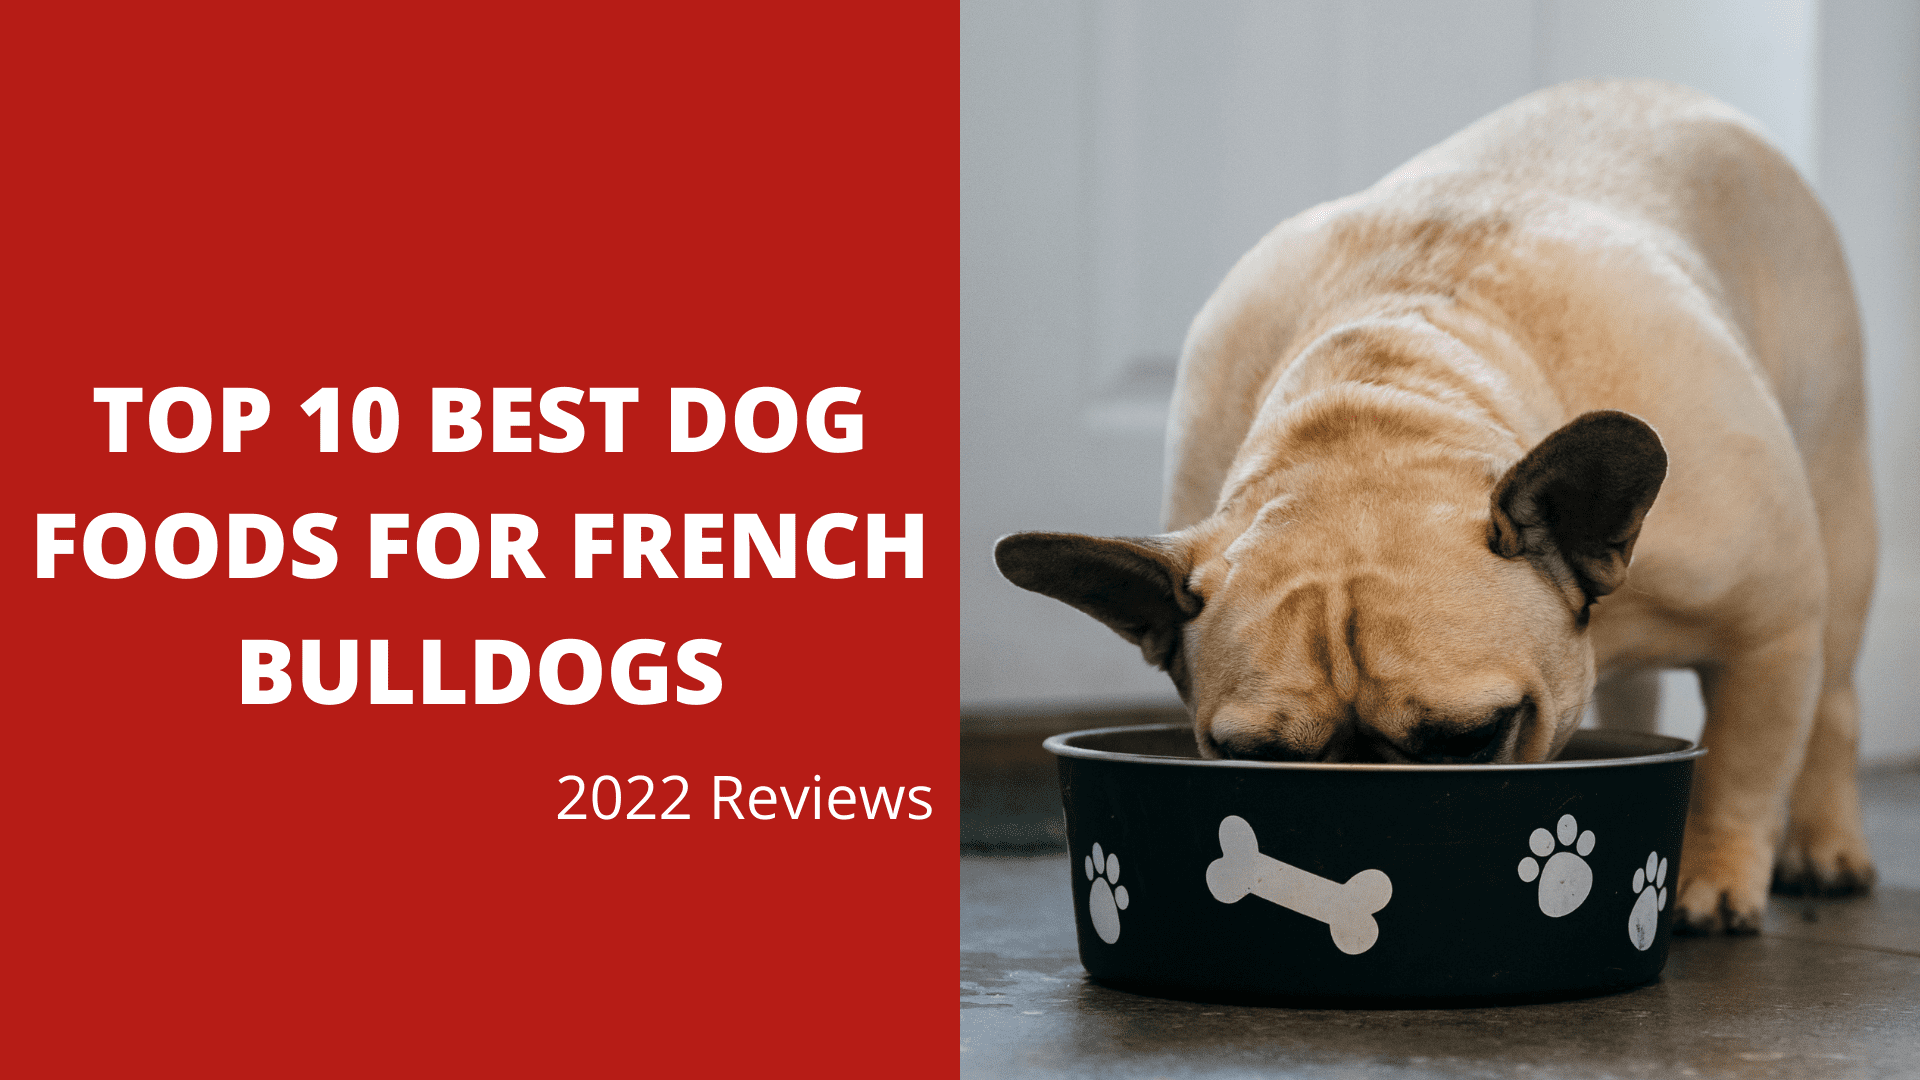 Top 10 Best Dog Foods For French Bulldogs (2022 Reviews)